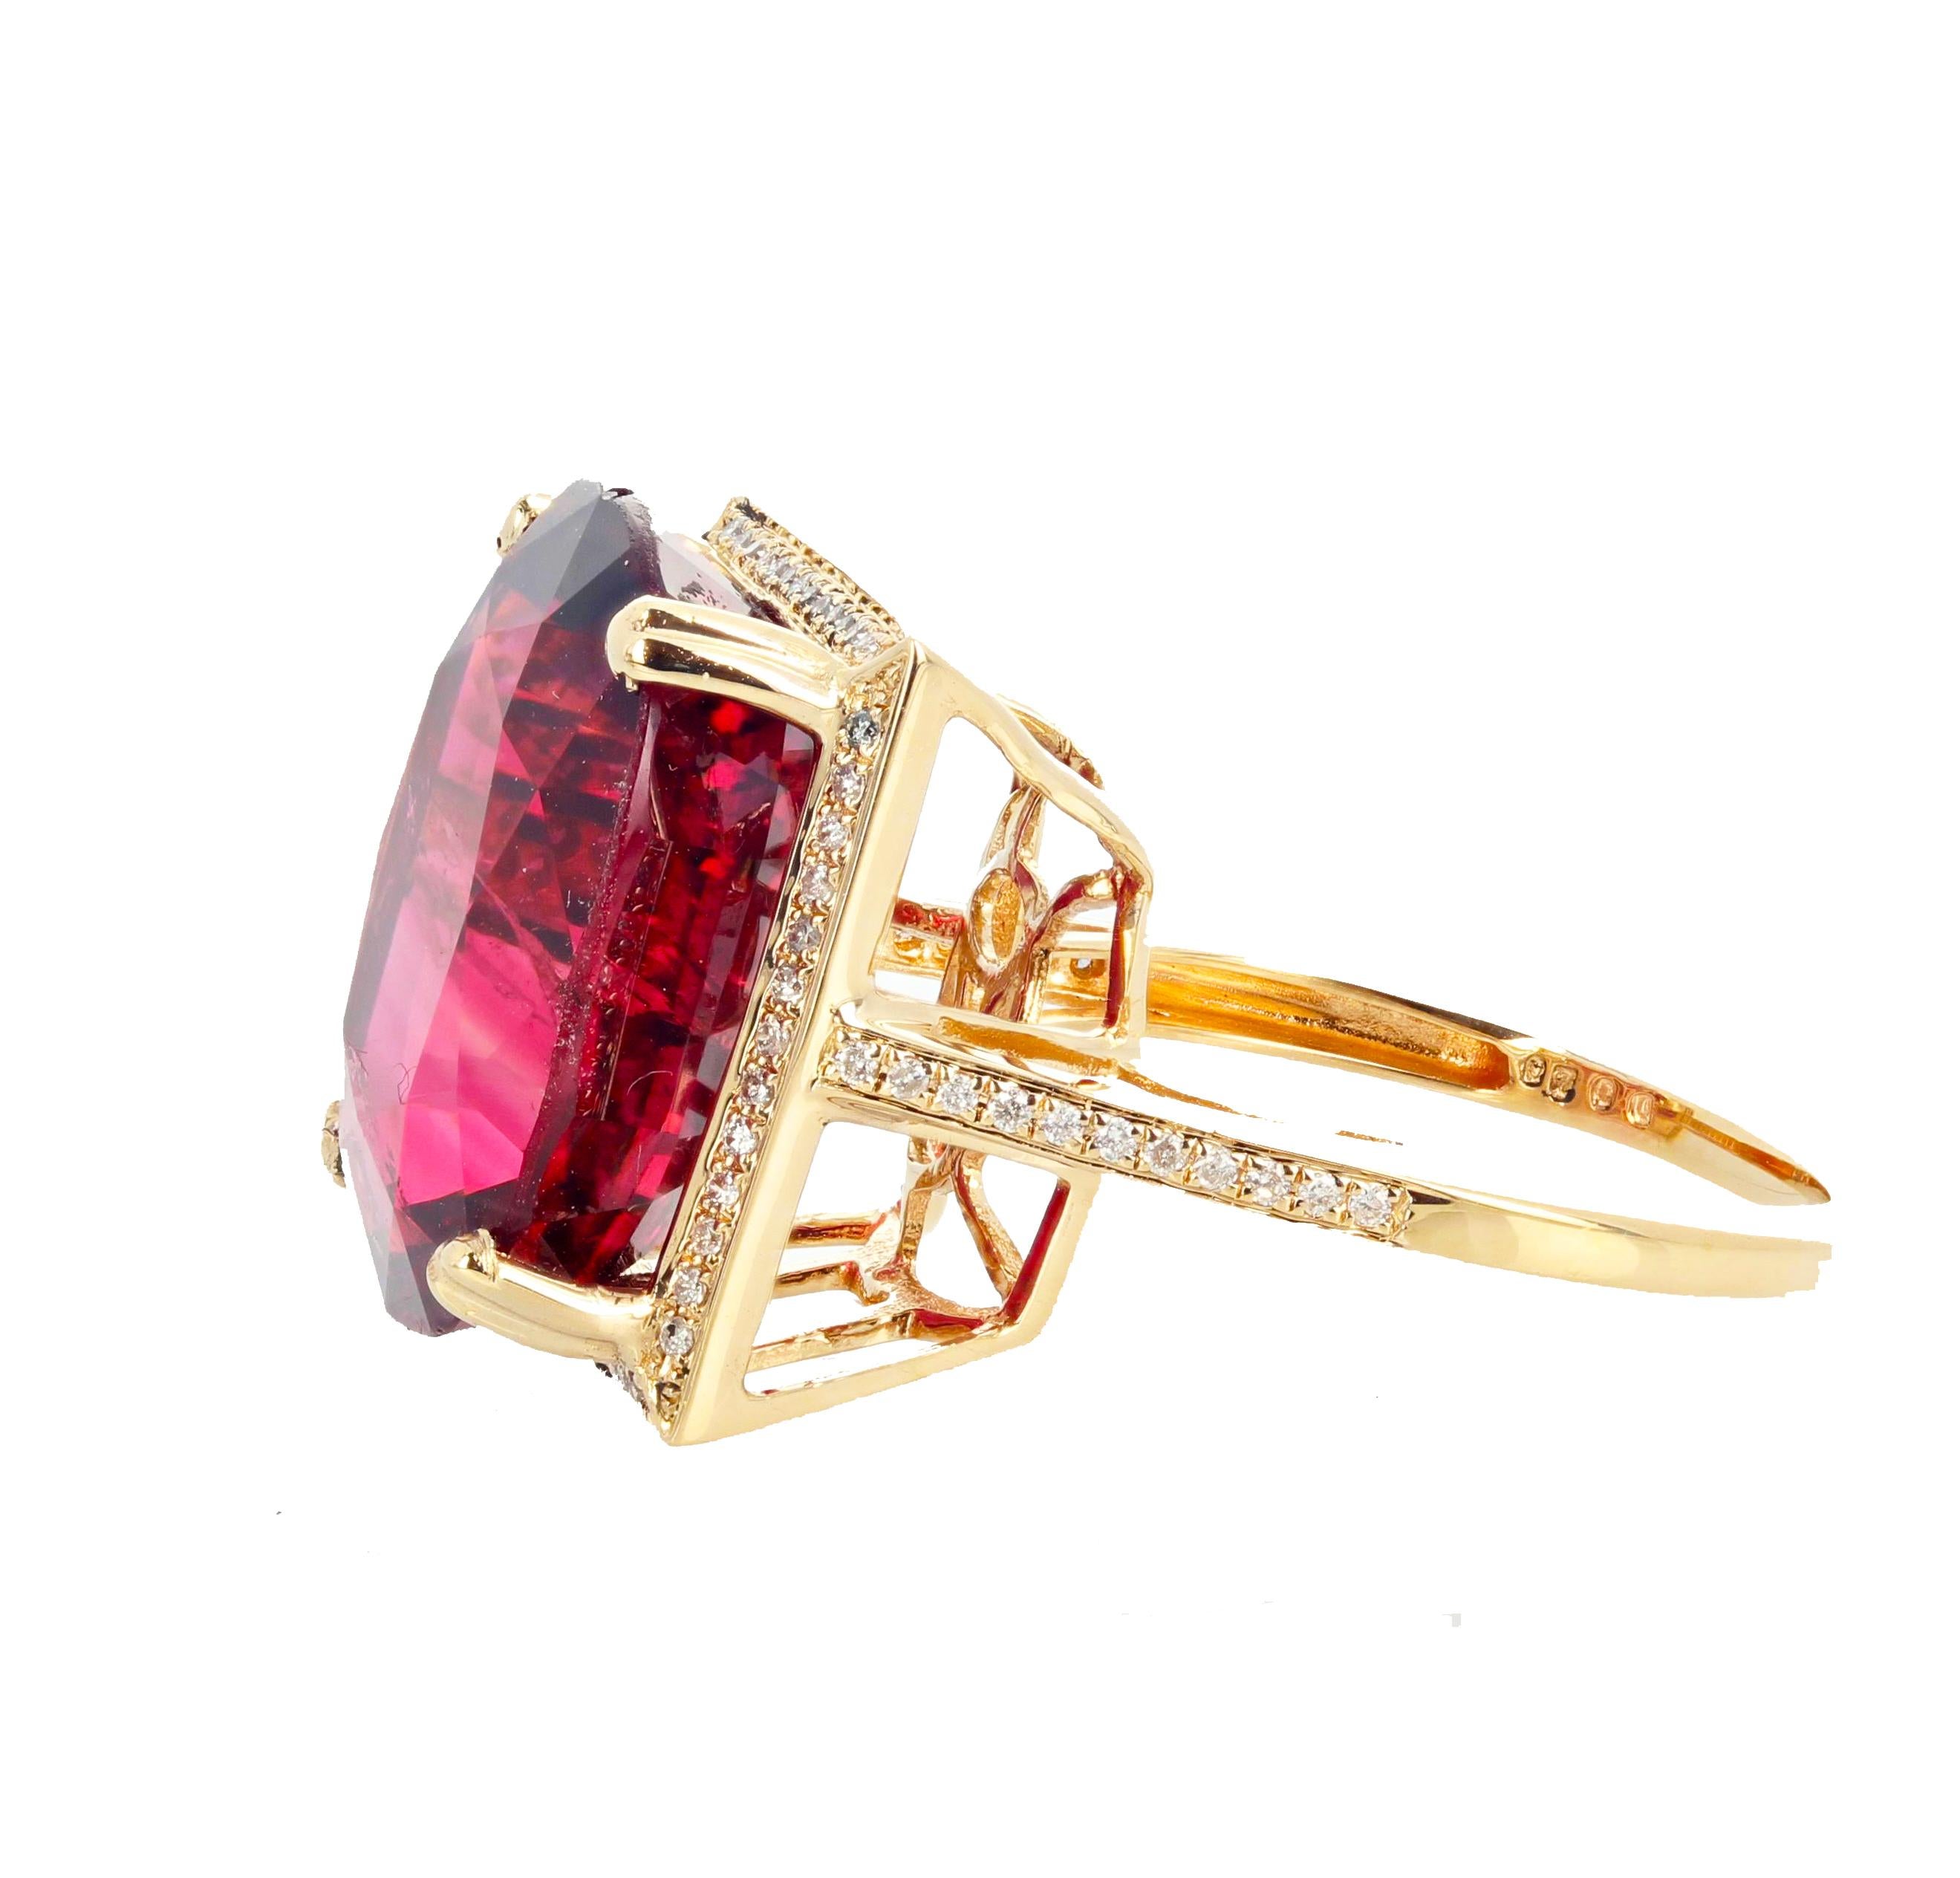 Gemjunky Glittering brilliant natural red 16.21 carat Tourmaline - 17 m x 16 mm - set in this beautiful white diamond enhanced 14KT yellow gold ring size 7 sizable FOR FREE.  There are natural inclusions too small to appear in the photograph (or